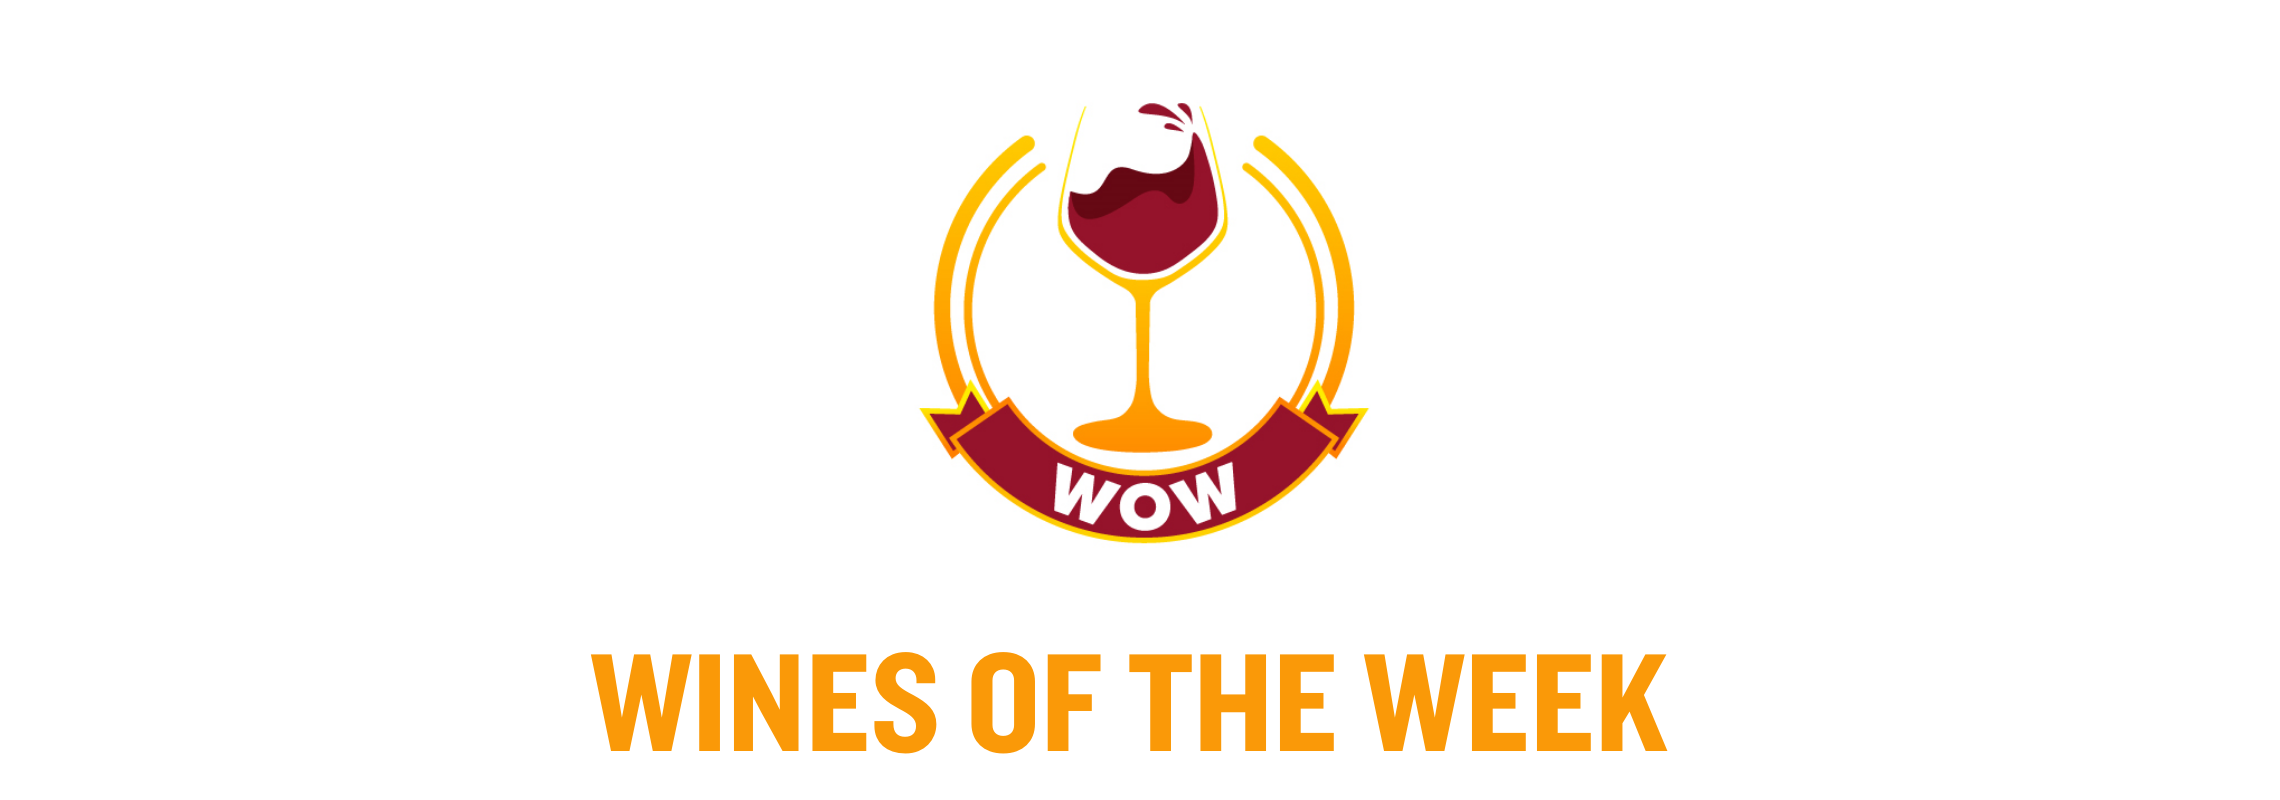 "WOW" Wines of the Week